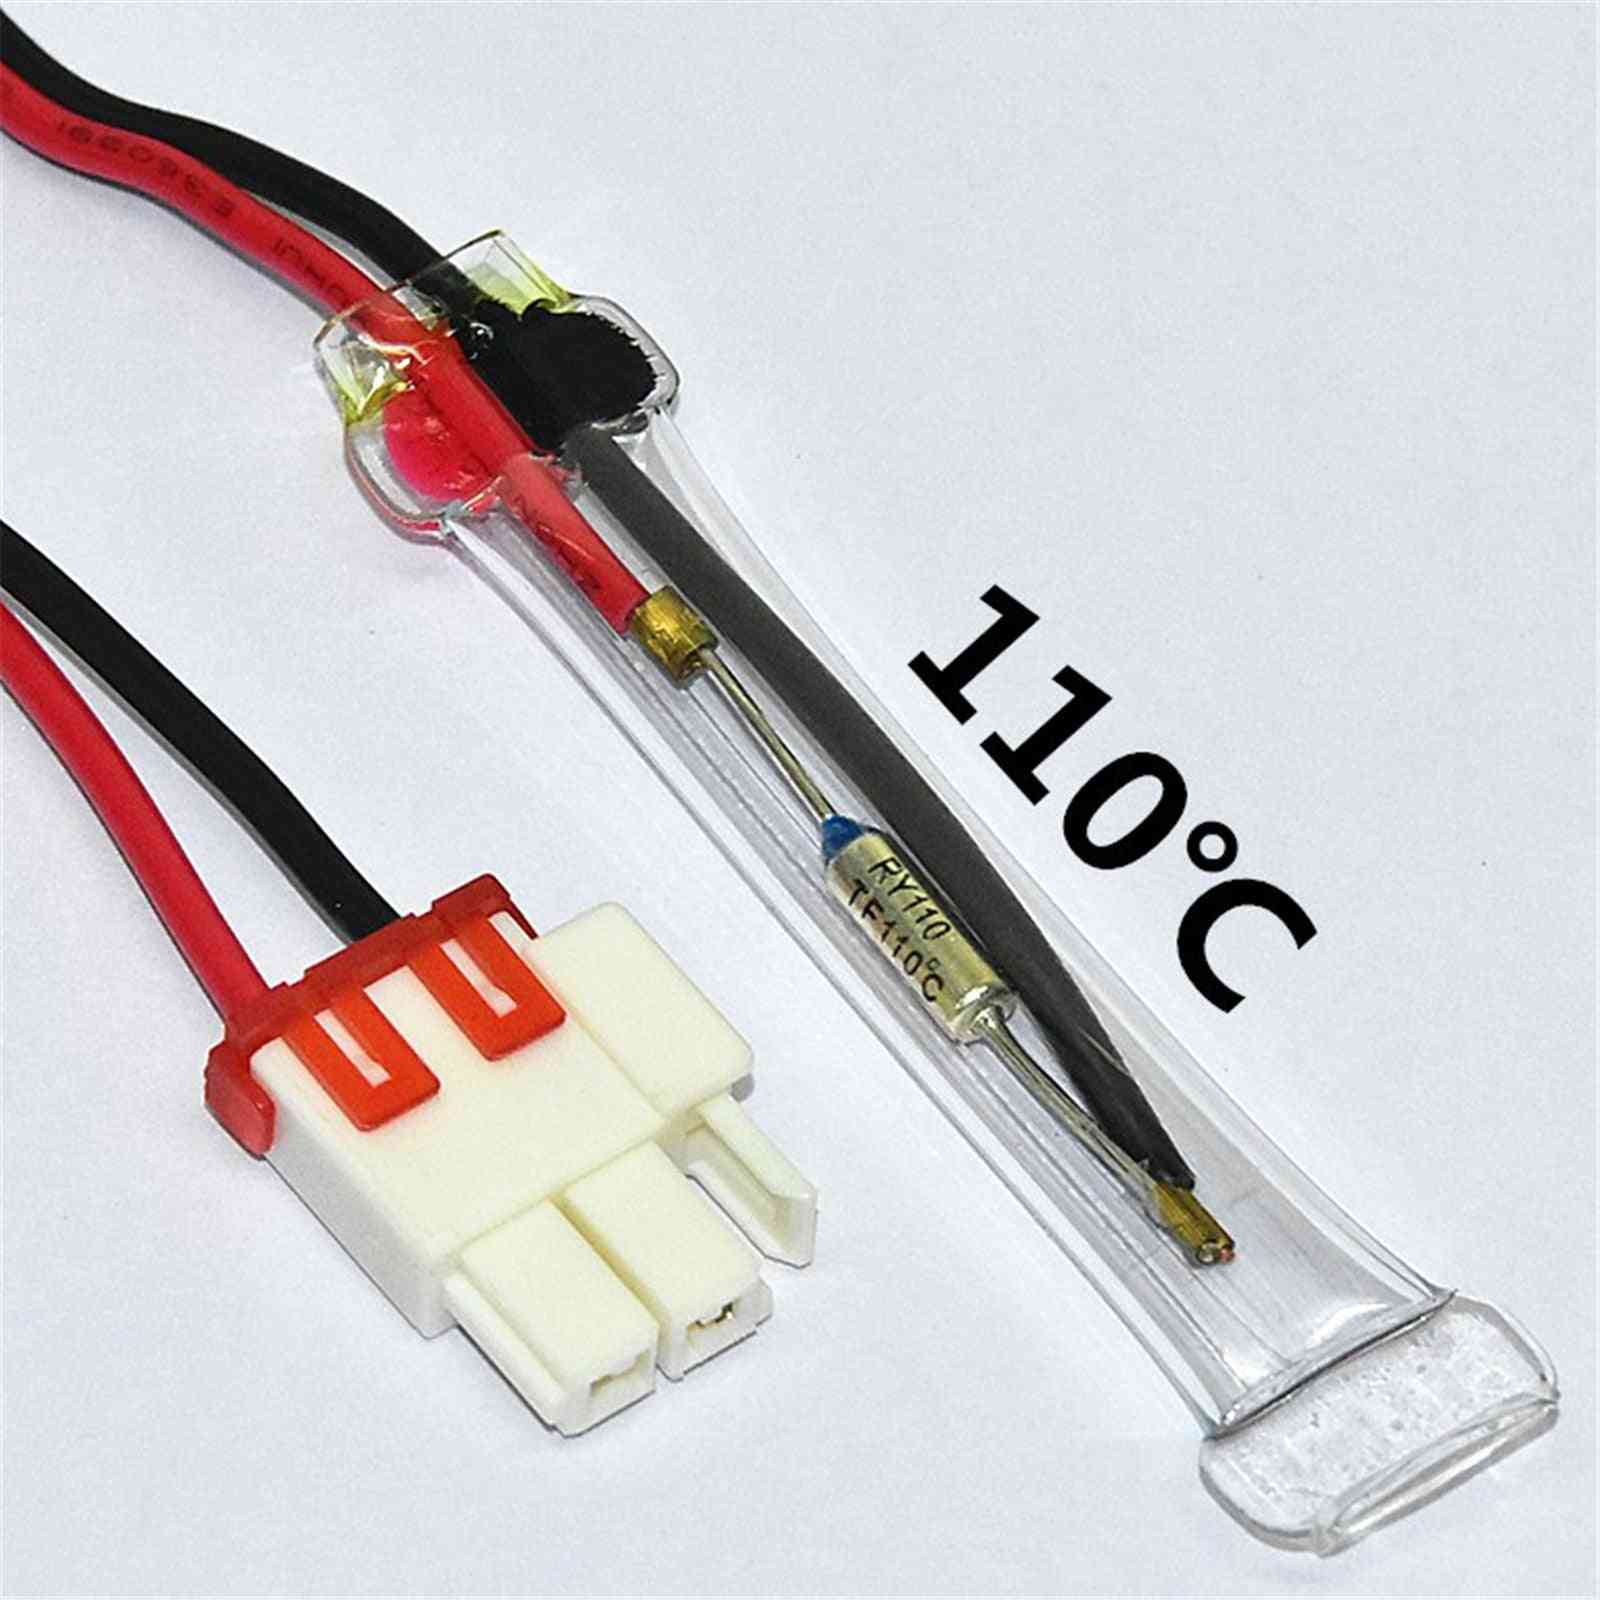 Thermal Fuse Defrost Sensor For Samsung Fridge Freezers Replacement